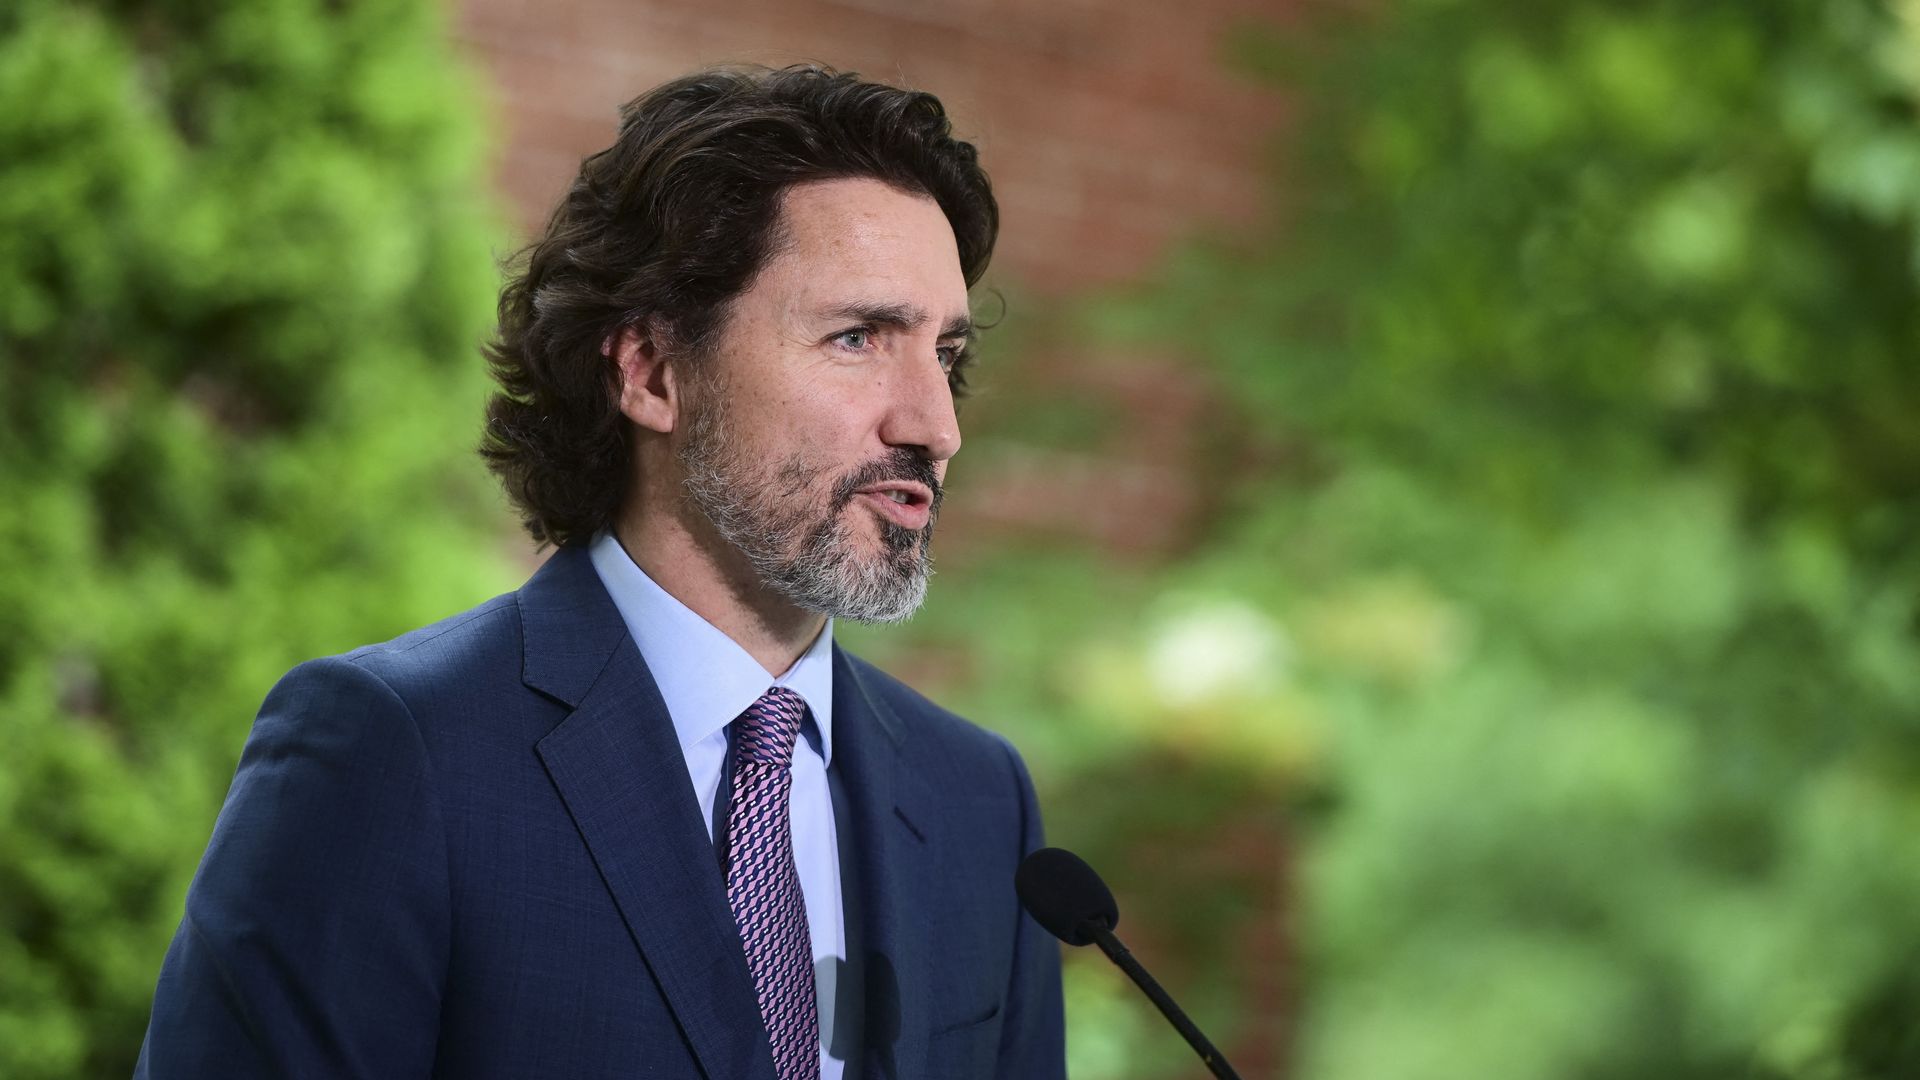 Canadian Prime Minister Justin Trudeau speaks during a news conference at Rideau Cottage in Ottawa, Canada